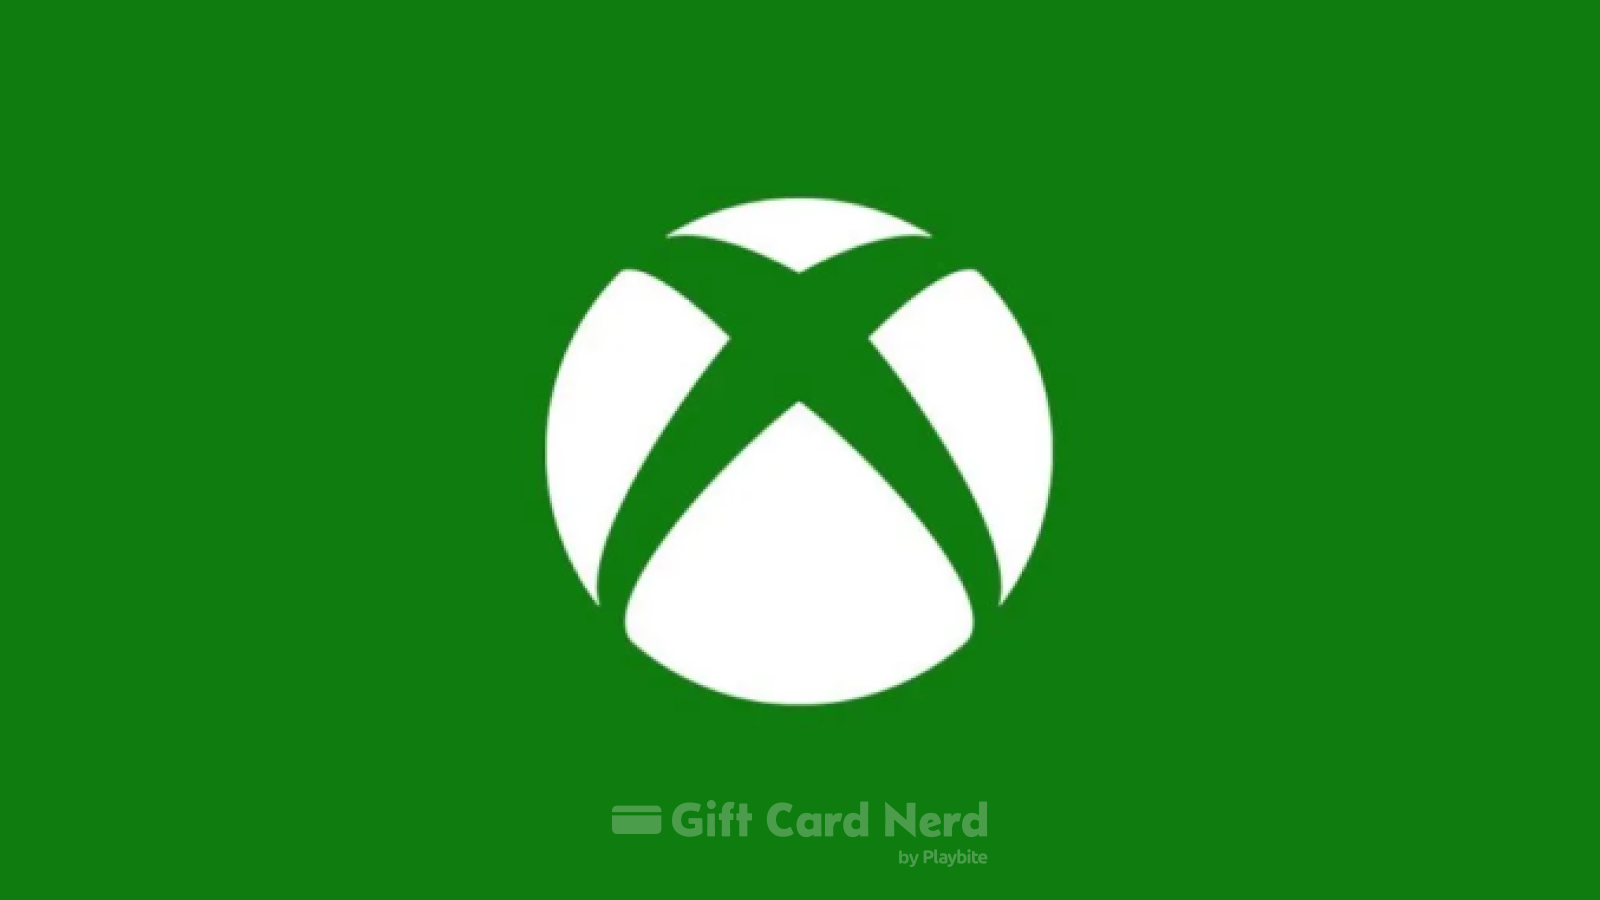 Can I Use an Xbox Gift Card on Cash App?